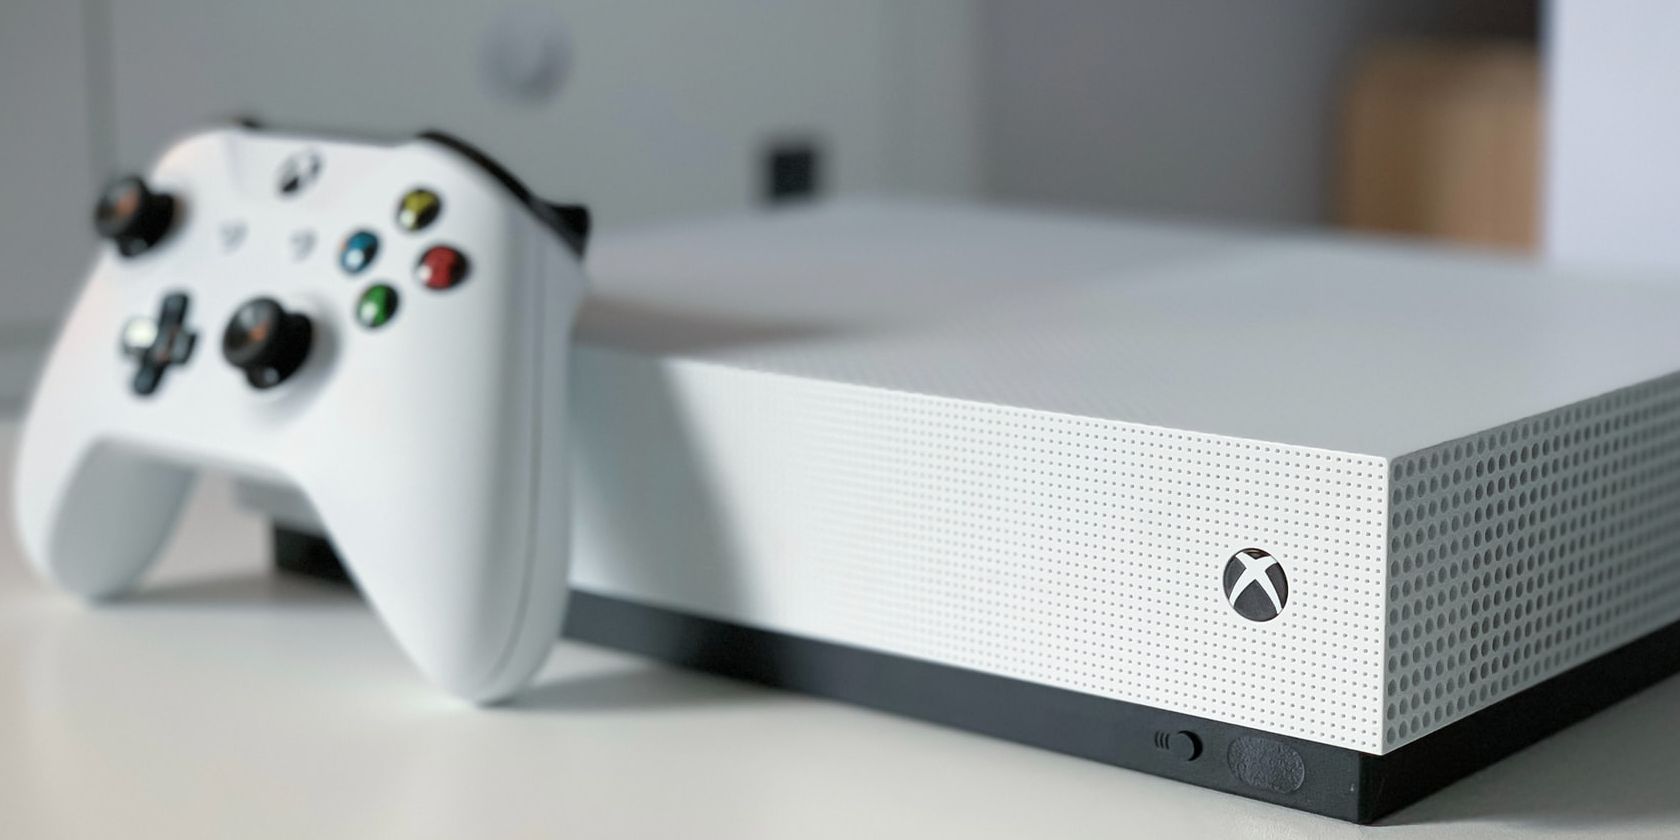 Beware the Hidden Costs of Buying an All-Digital Game Console